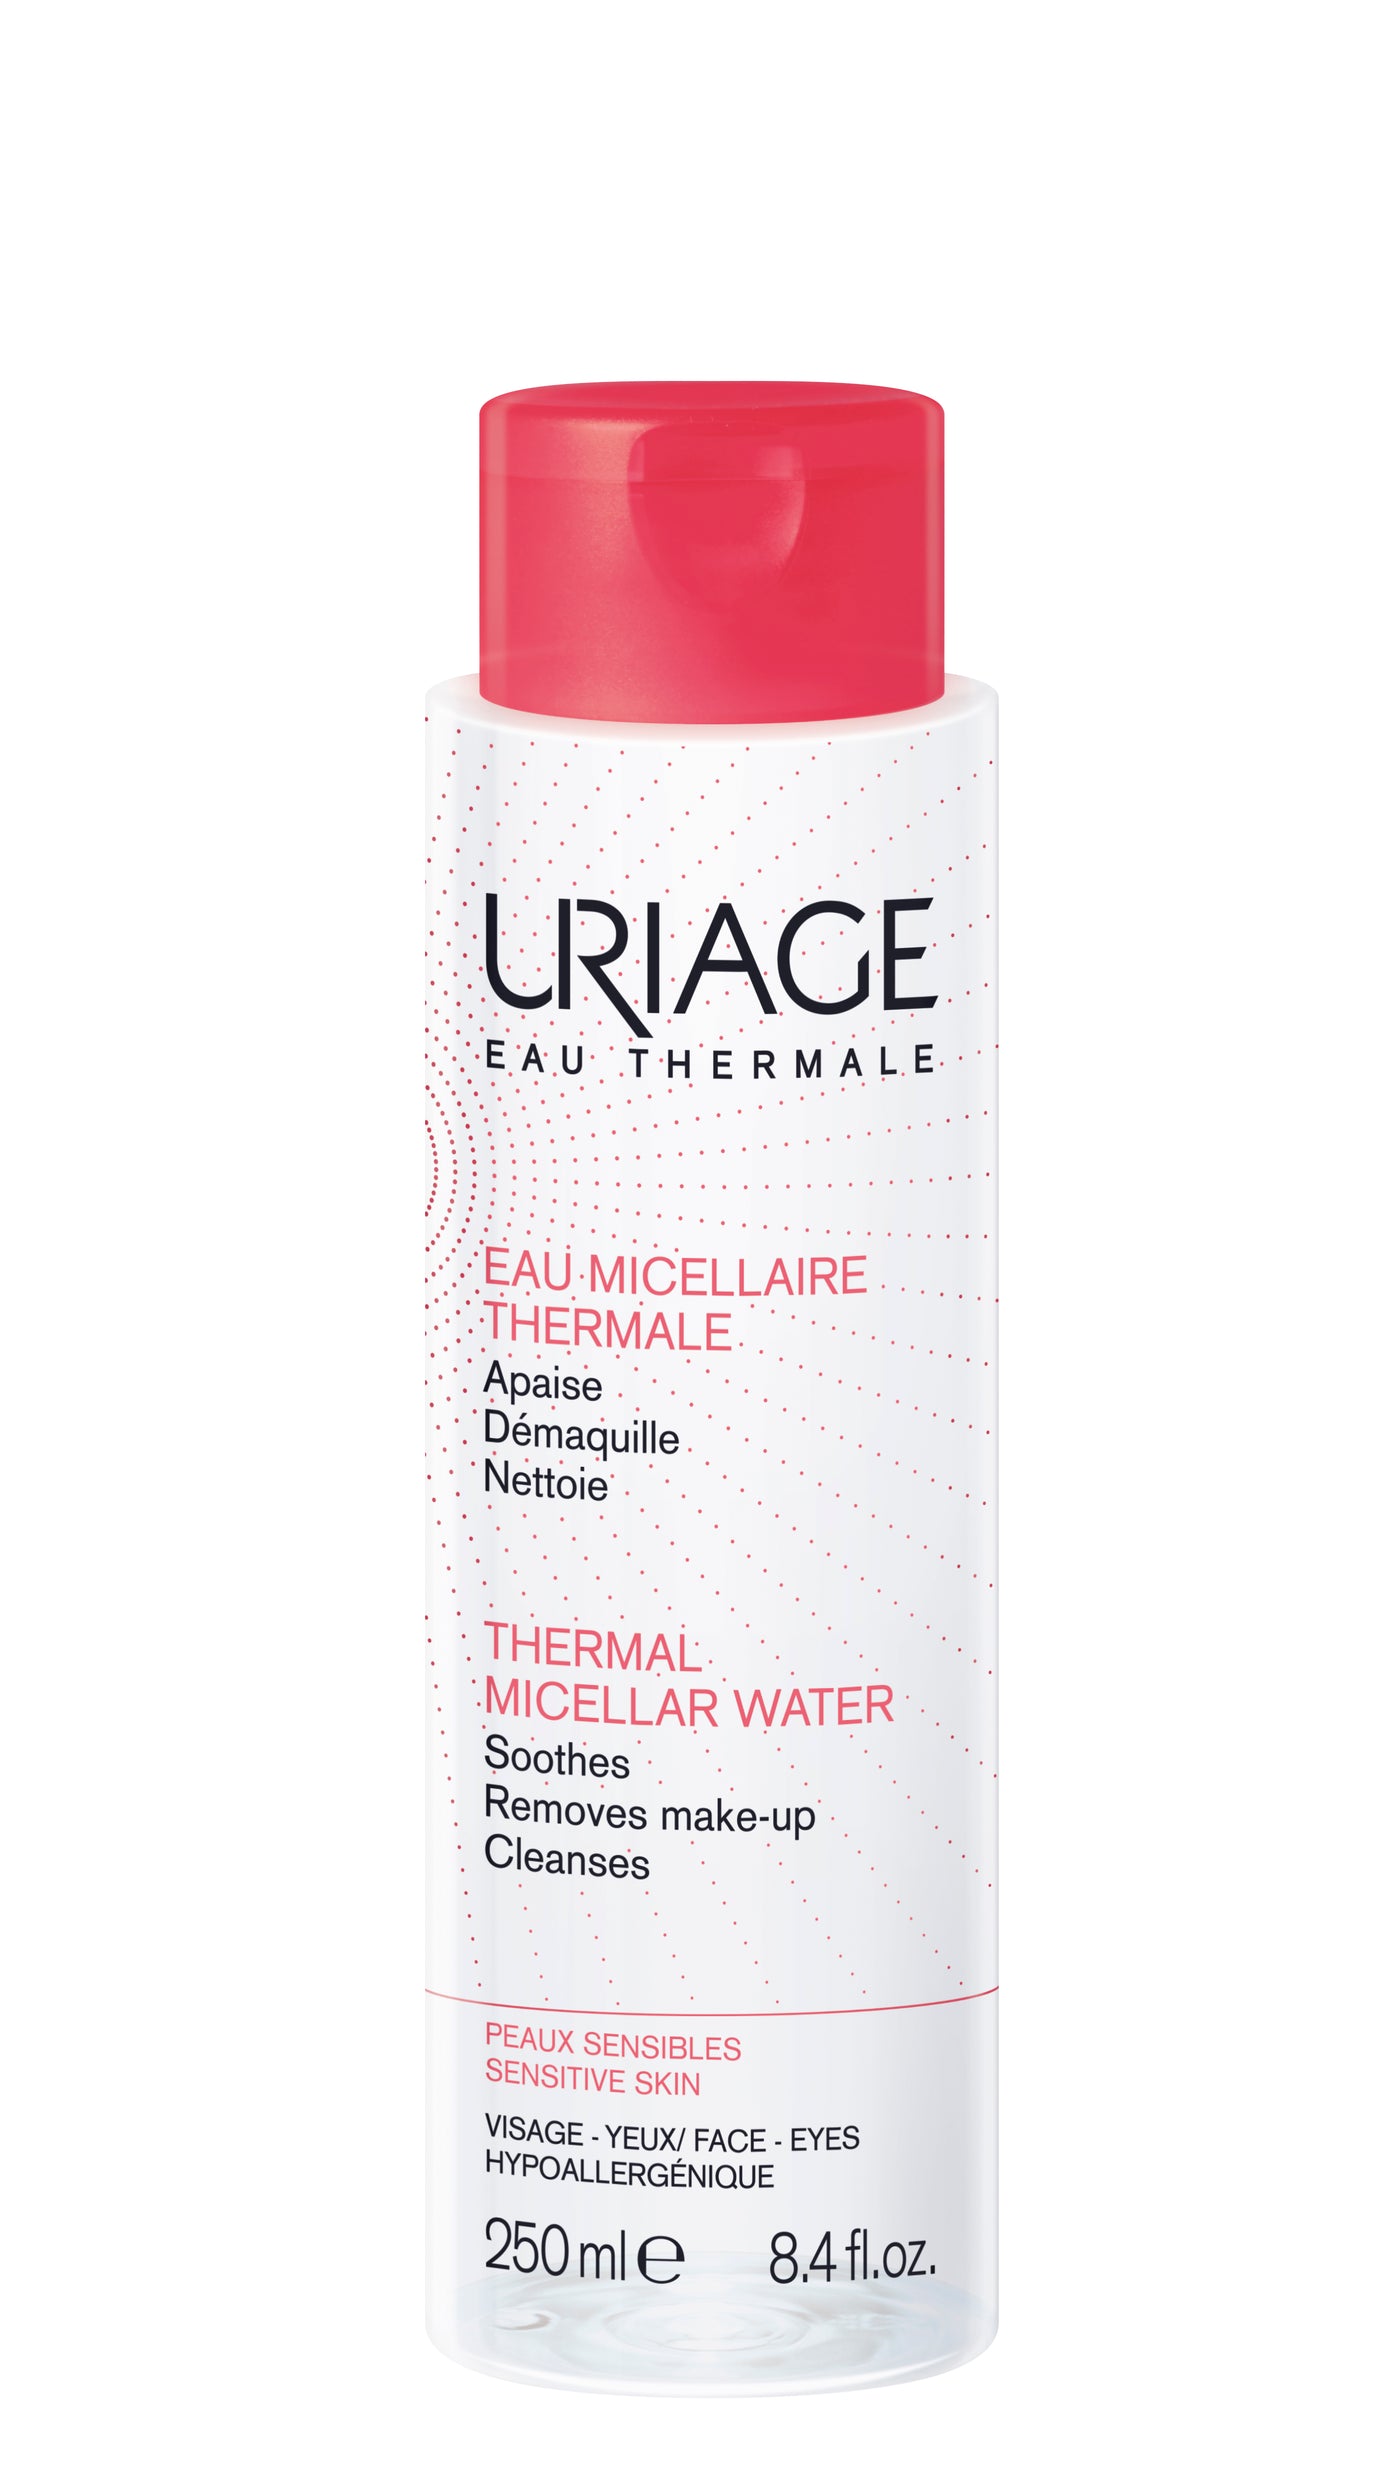 Uriage - Eau Micellaire Thermale Psr - 250Ml